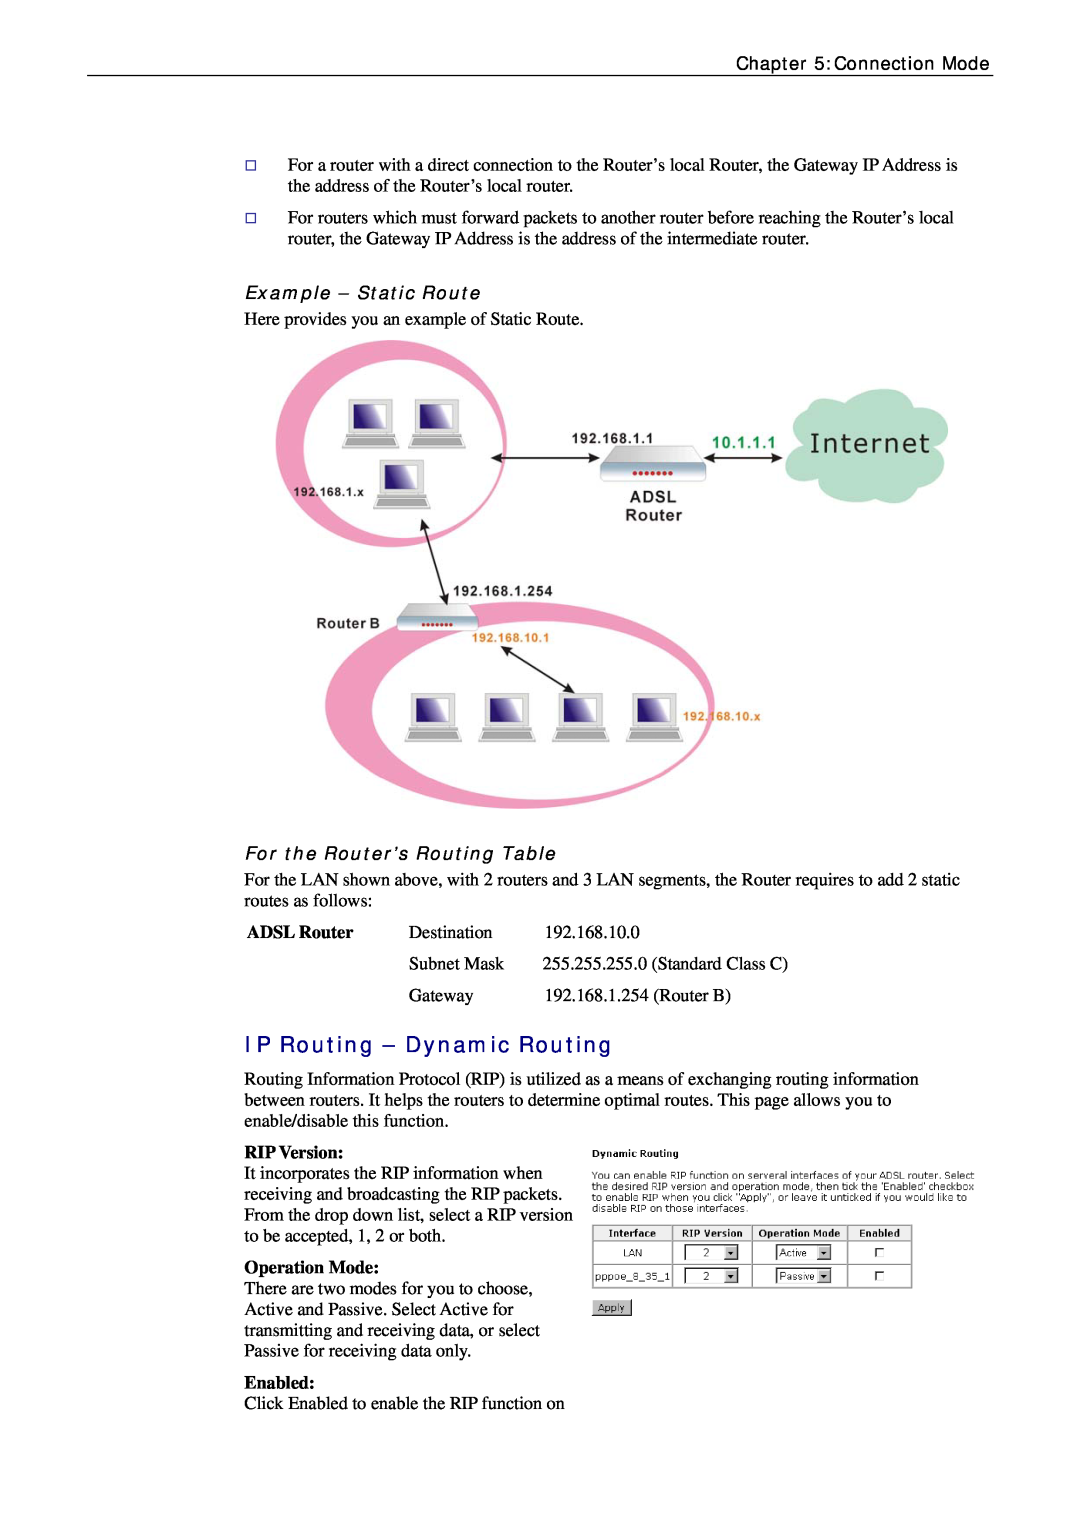 Siemens CL-010 IP Routing - Dynamic Routing, Example - Static Route, For the Router’s Routing Table, ADSL Router, Enabled 